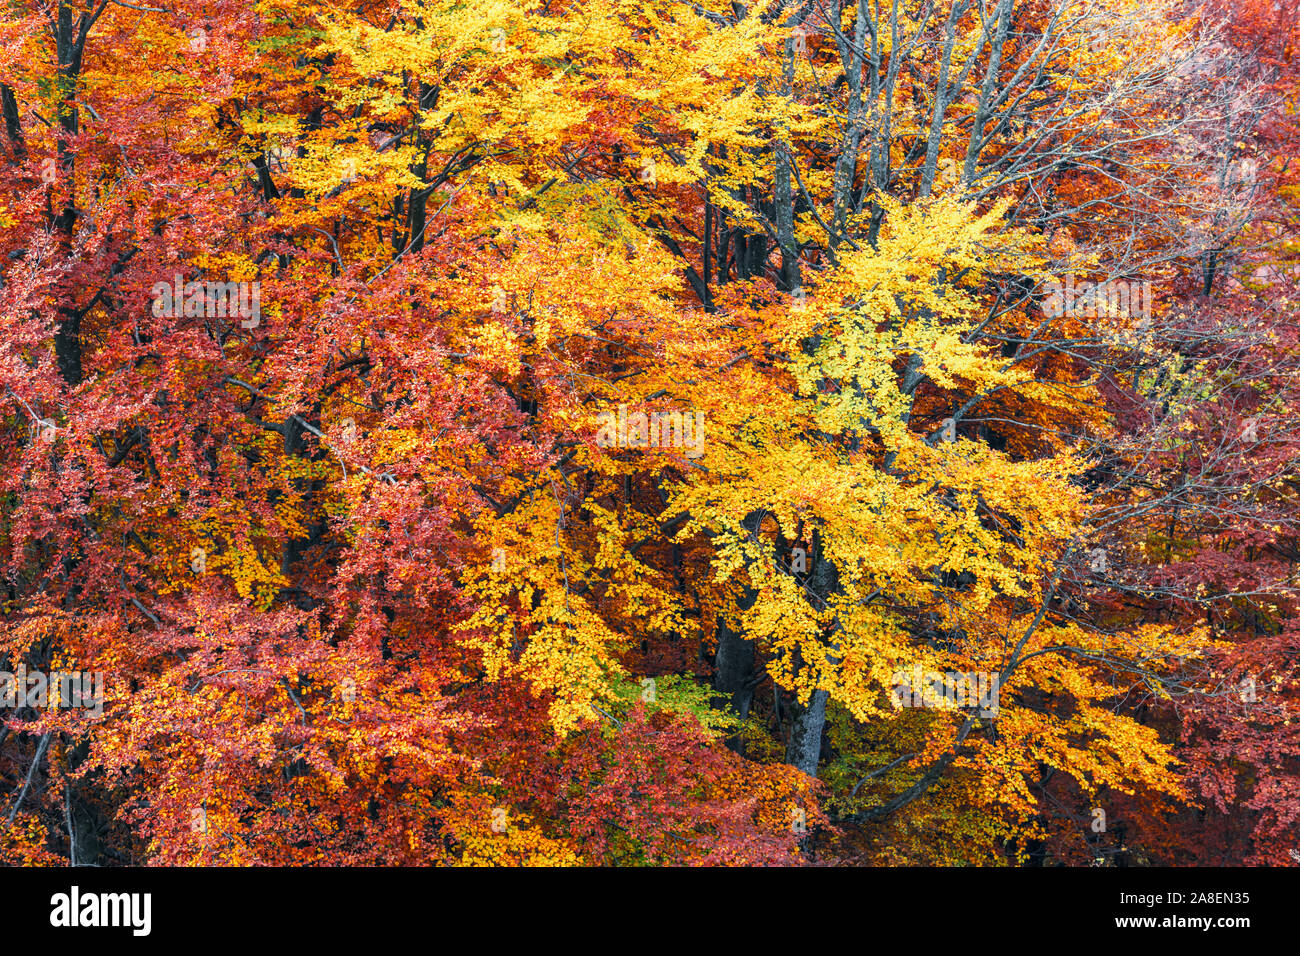 Colourful beech branches with yellow and orange folliage at autumn forest. Picturesque fall scene in Carpathian mountains, Ukraine. Landscape photogra Stock Photo